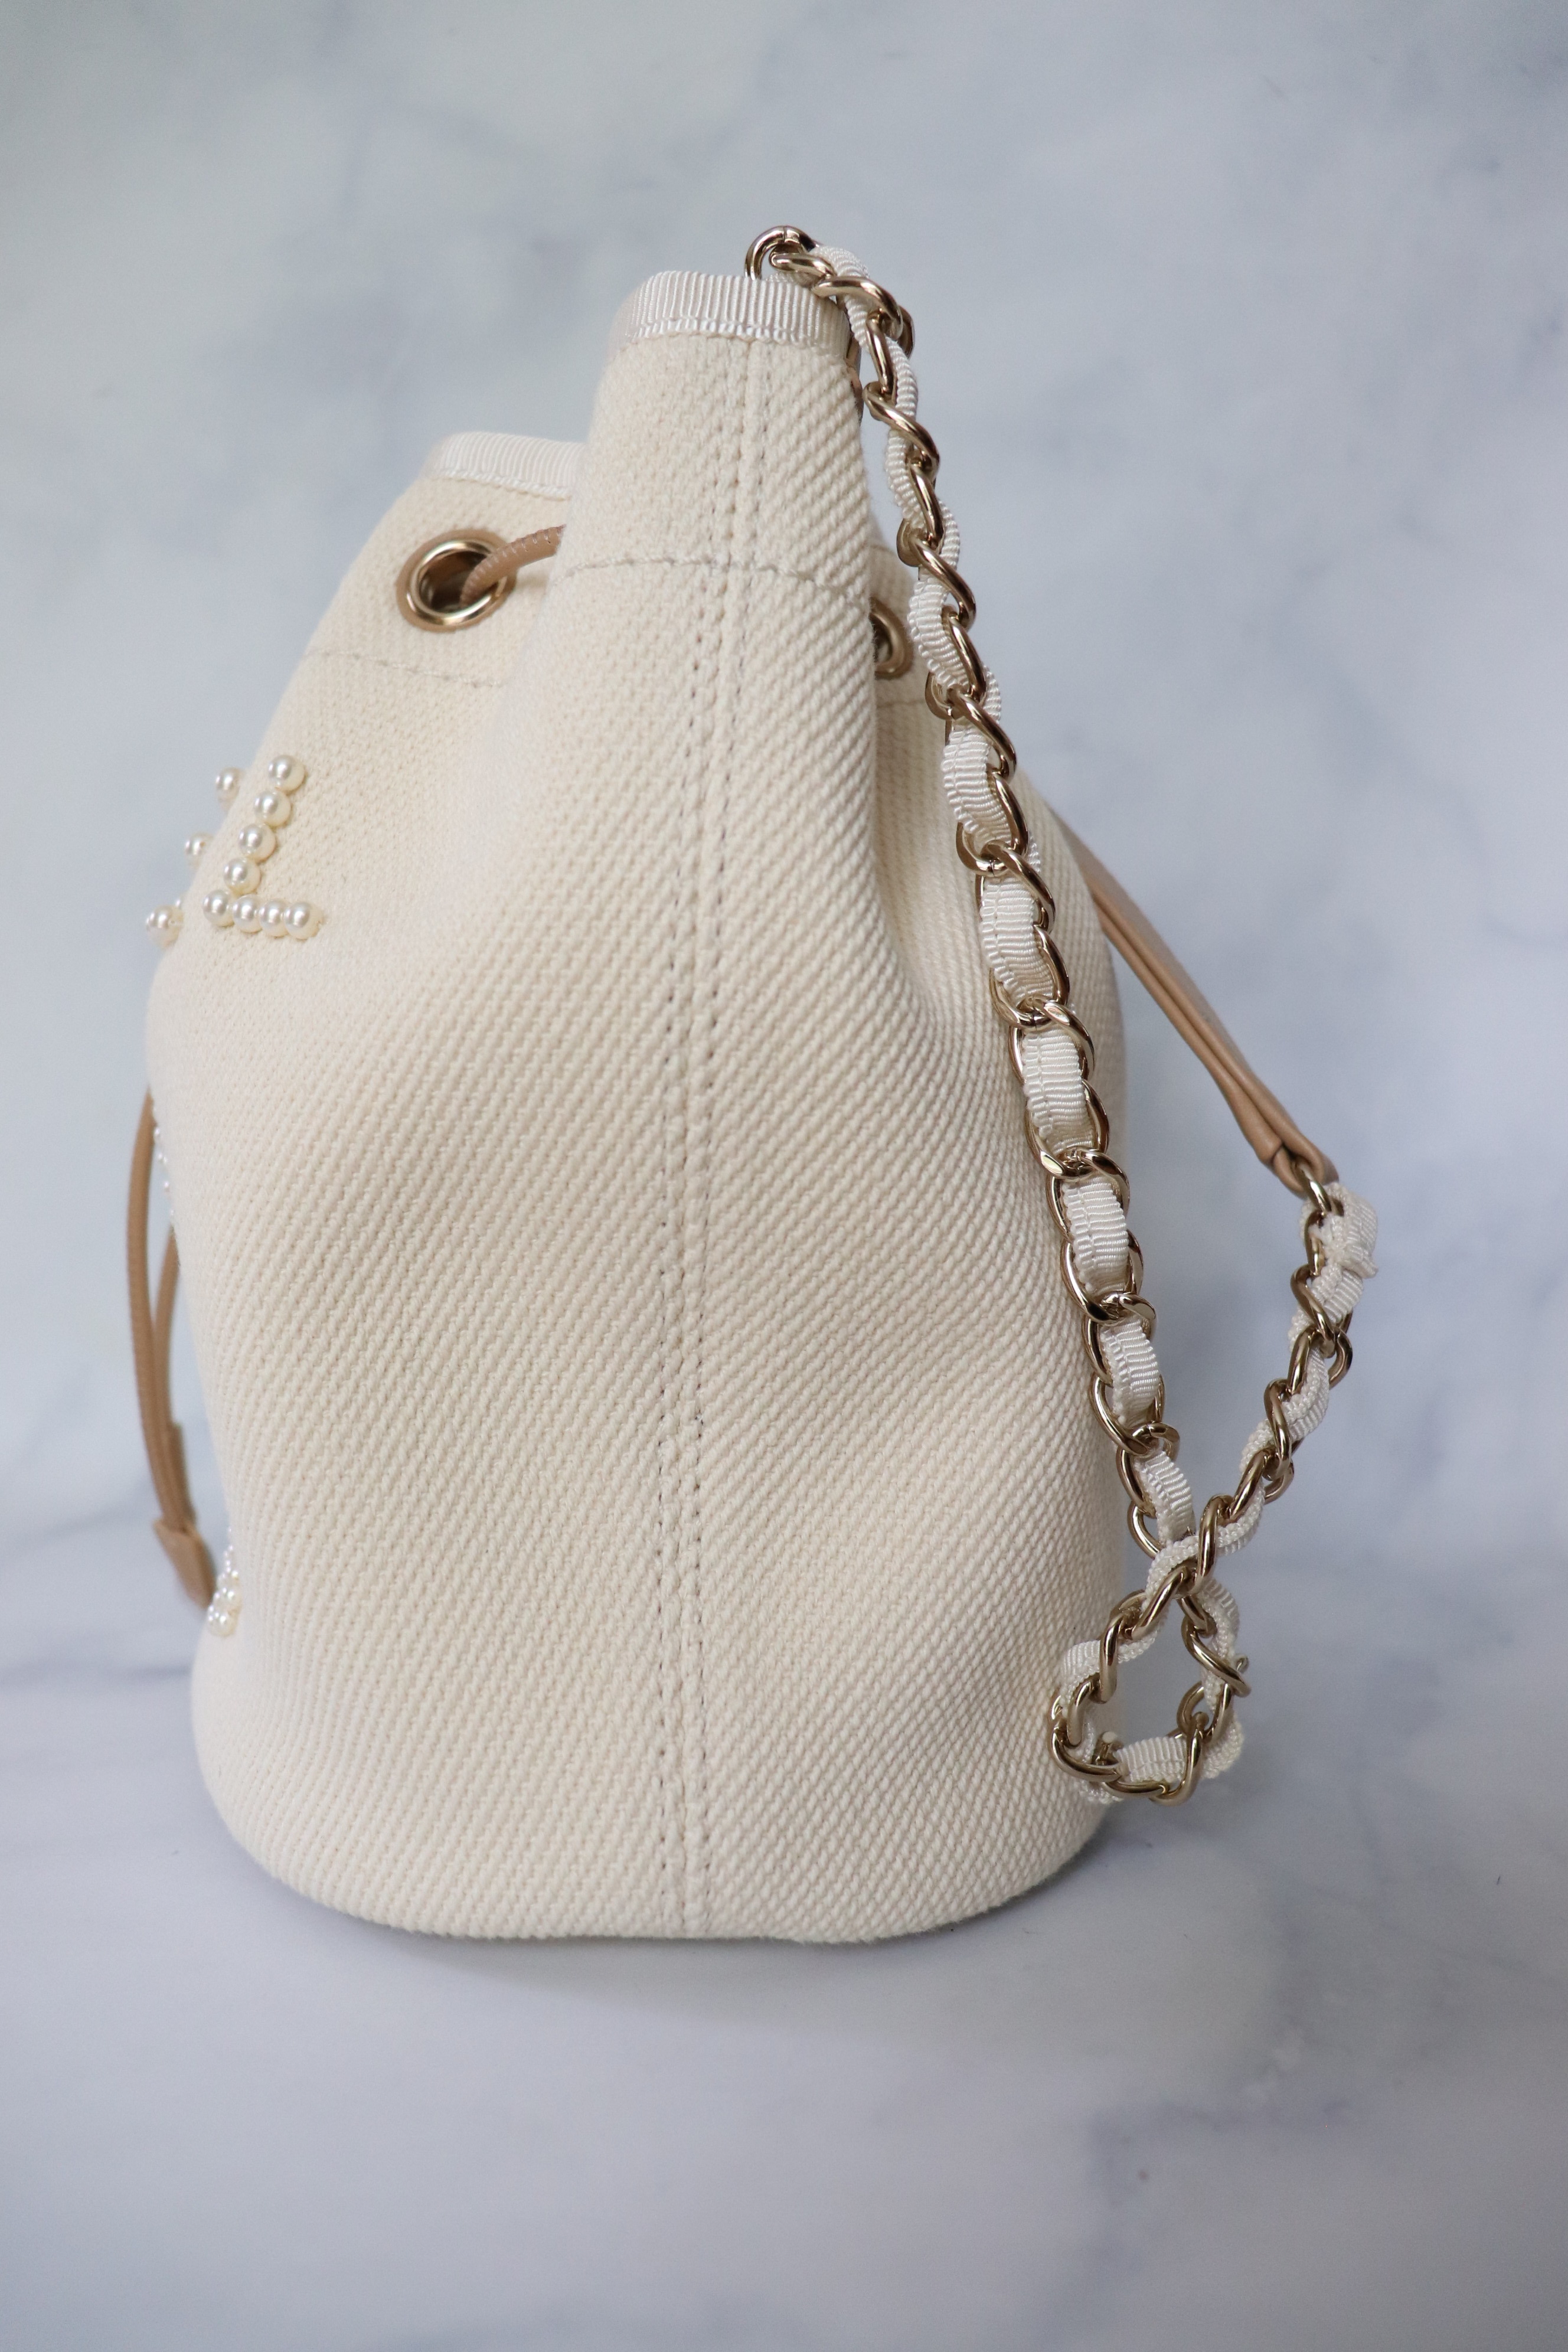 Chanel Caviar Quilted Rolled Up Bucket Drawstring Bag Beige Gold